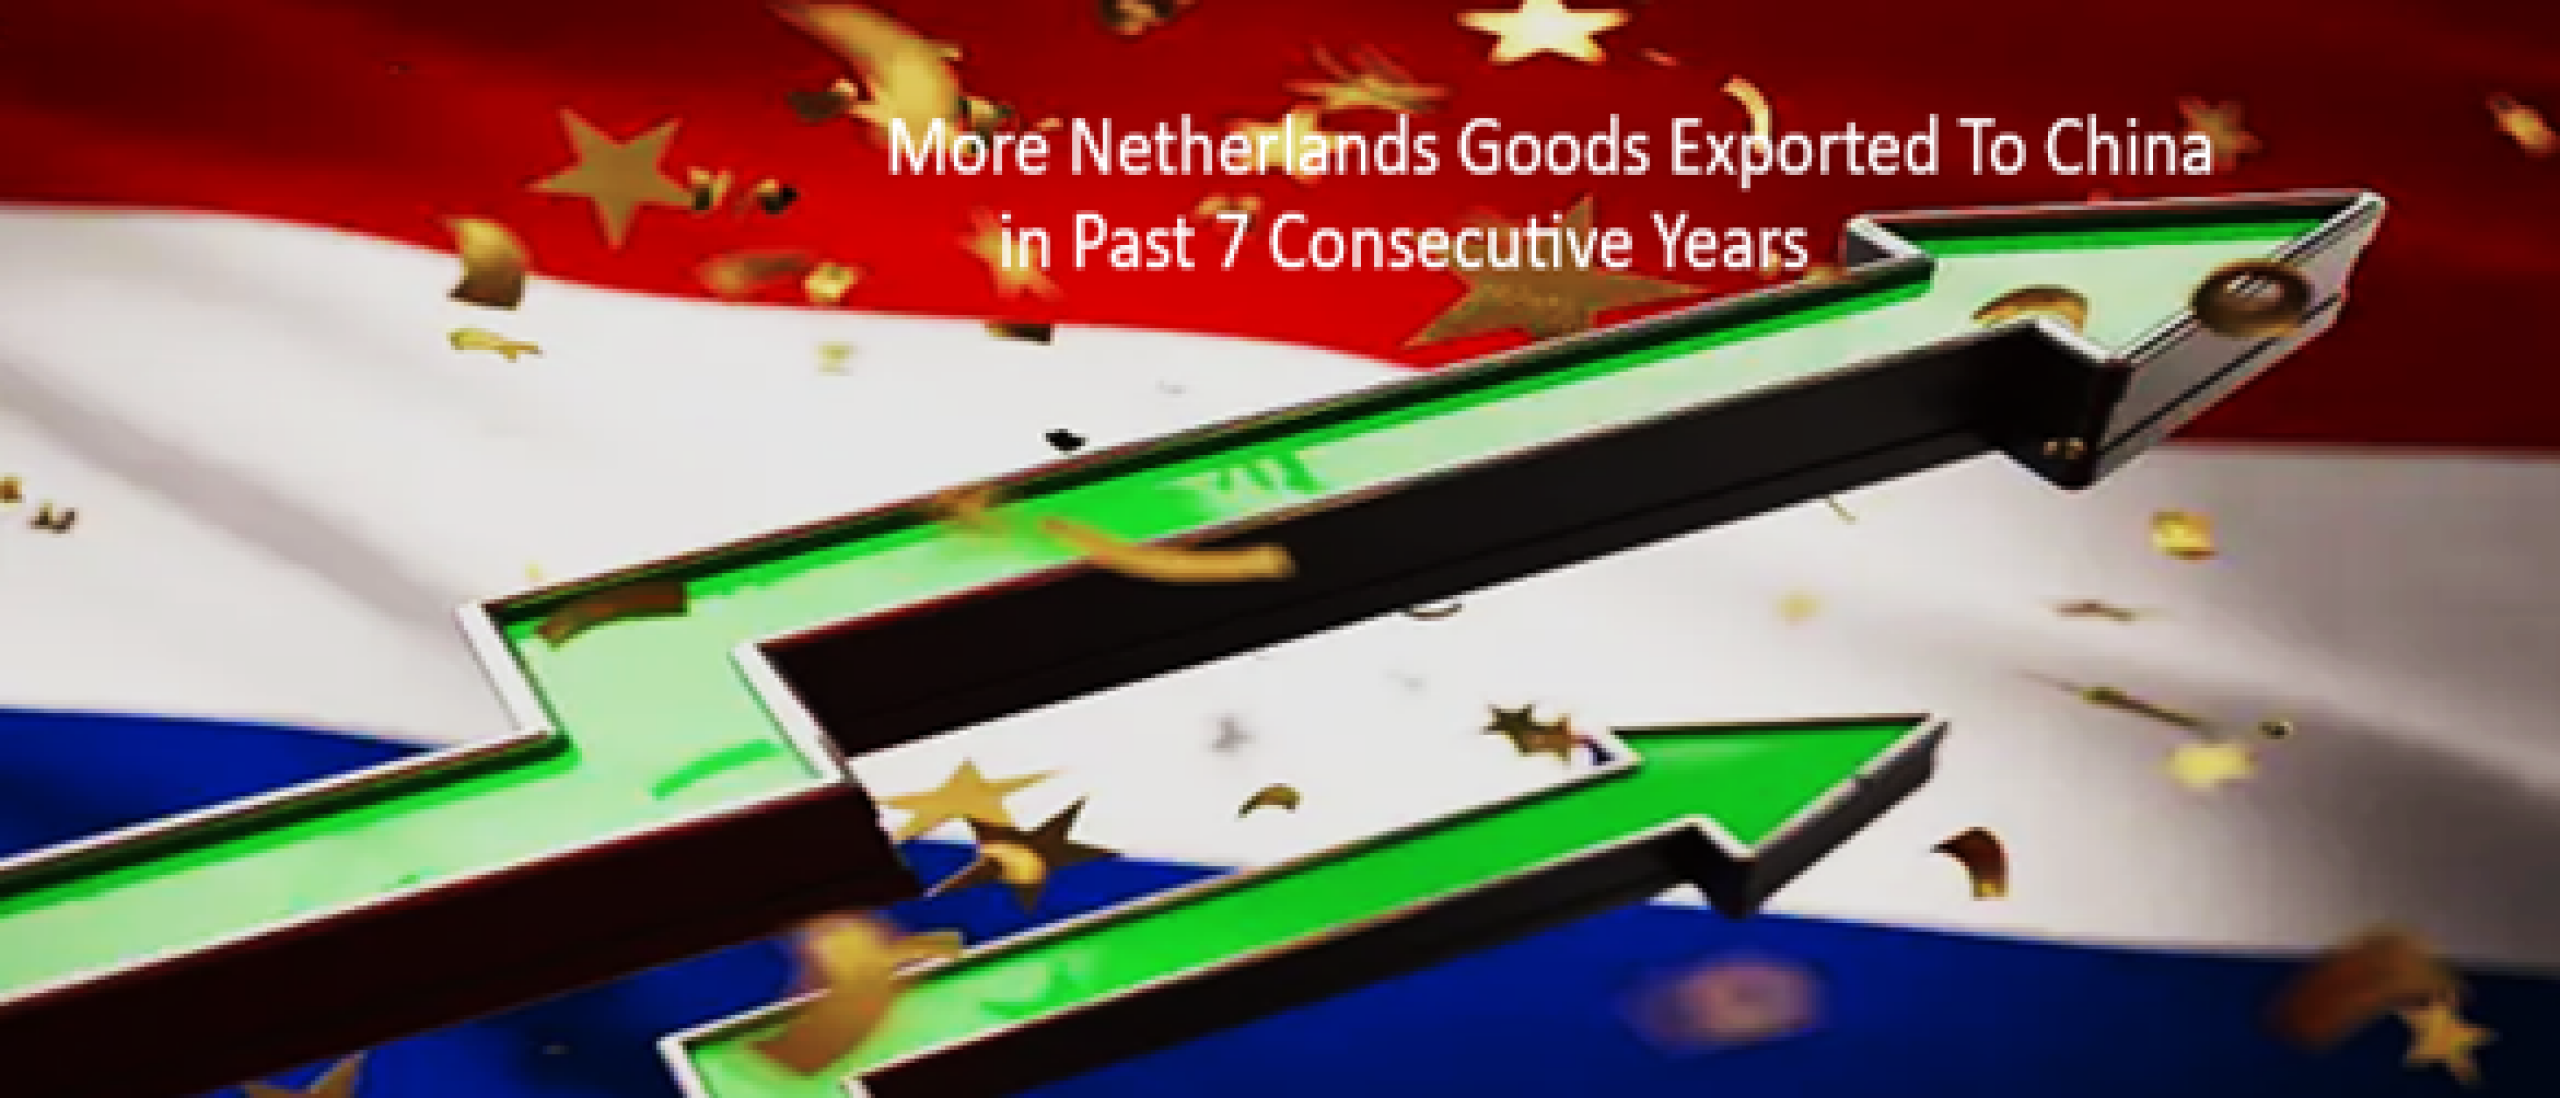 More Netherlands goods exported to China in past 7 consecutive years